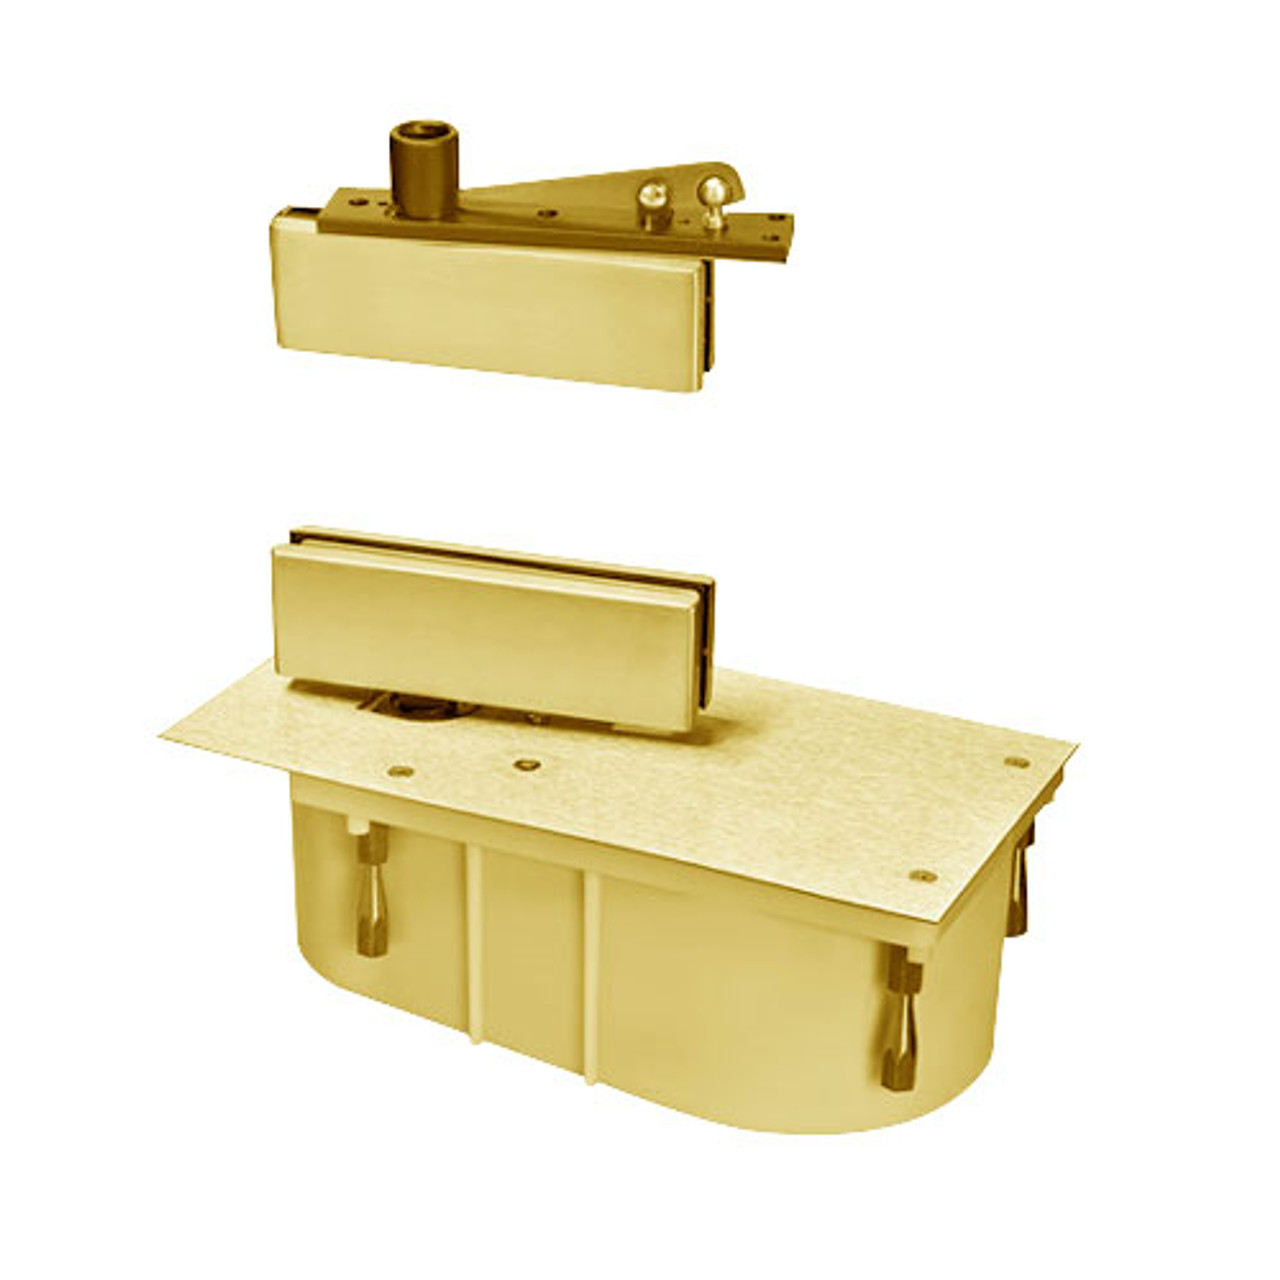 428-105N-LH-605 Rixson 428 Series Heavy Duty Single Acting Center Hung Floor Closer with Patch Fittings in Bright Brass Finish